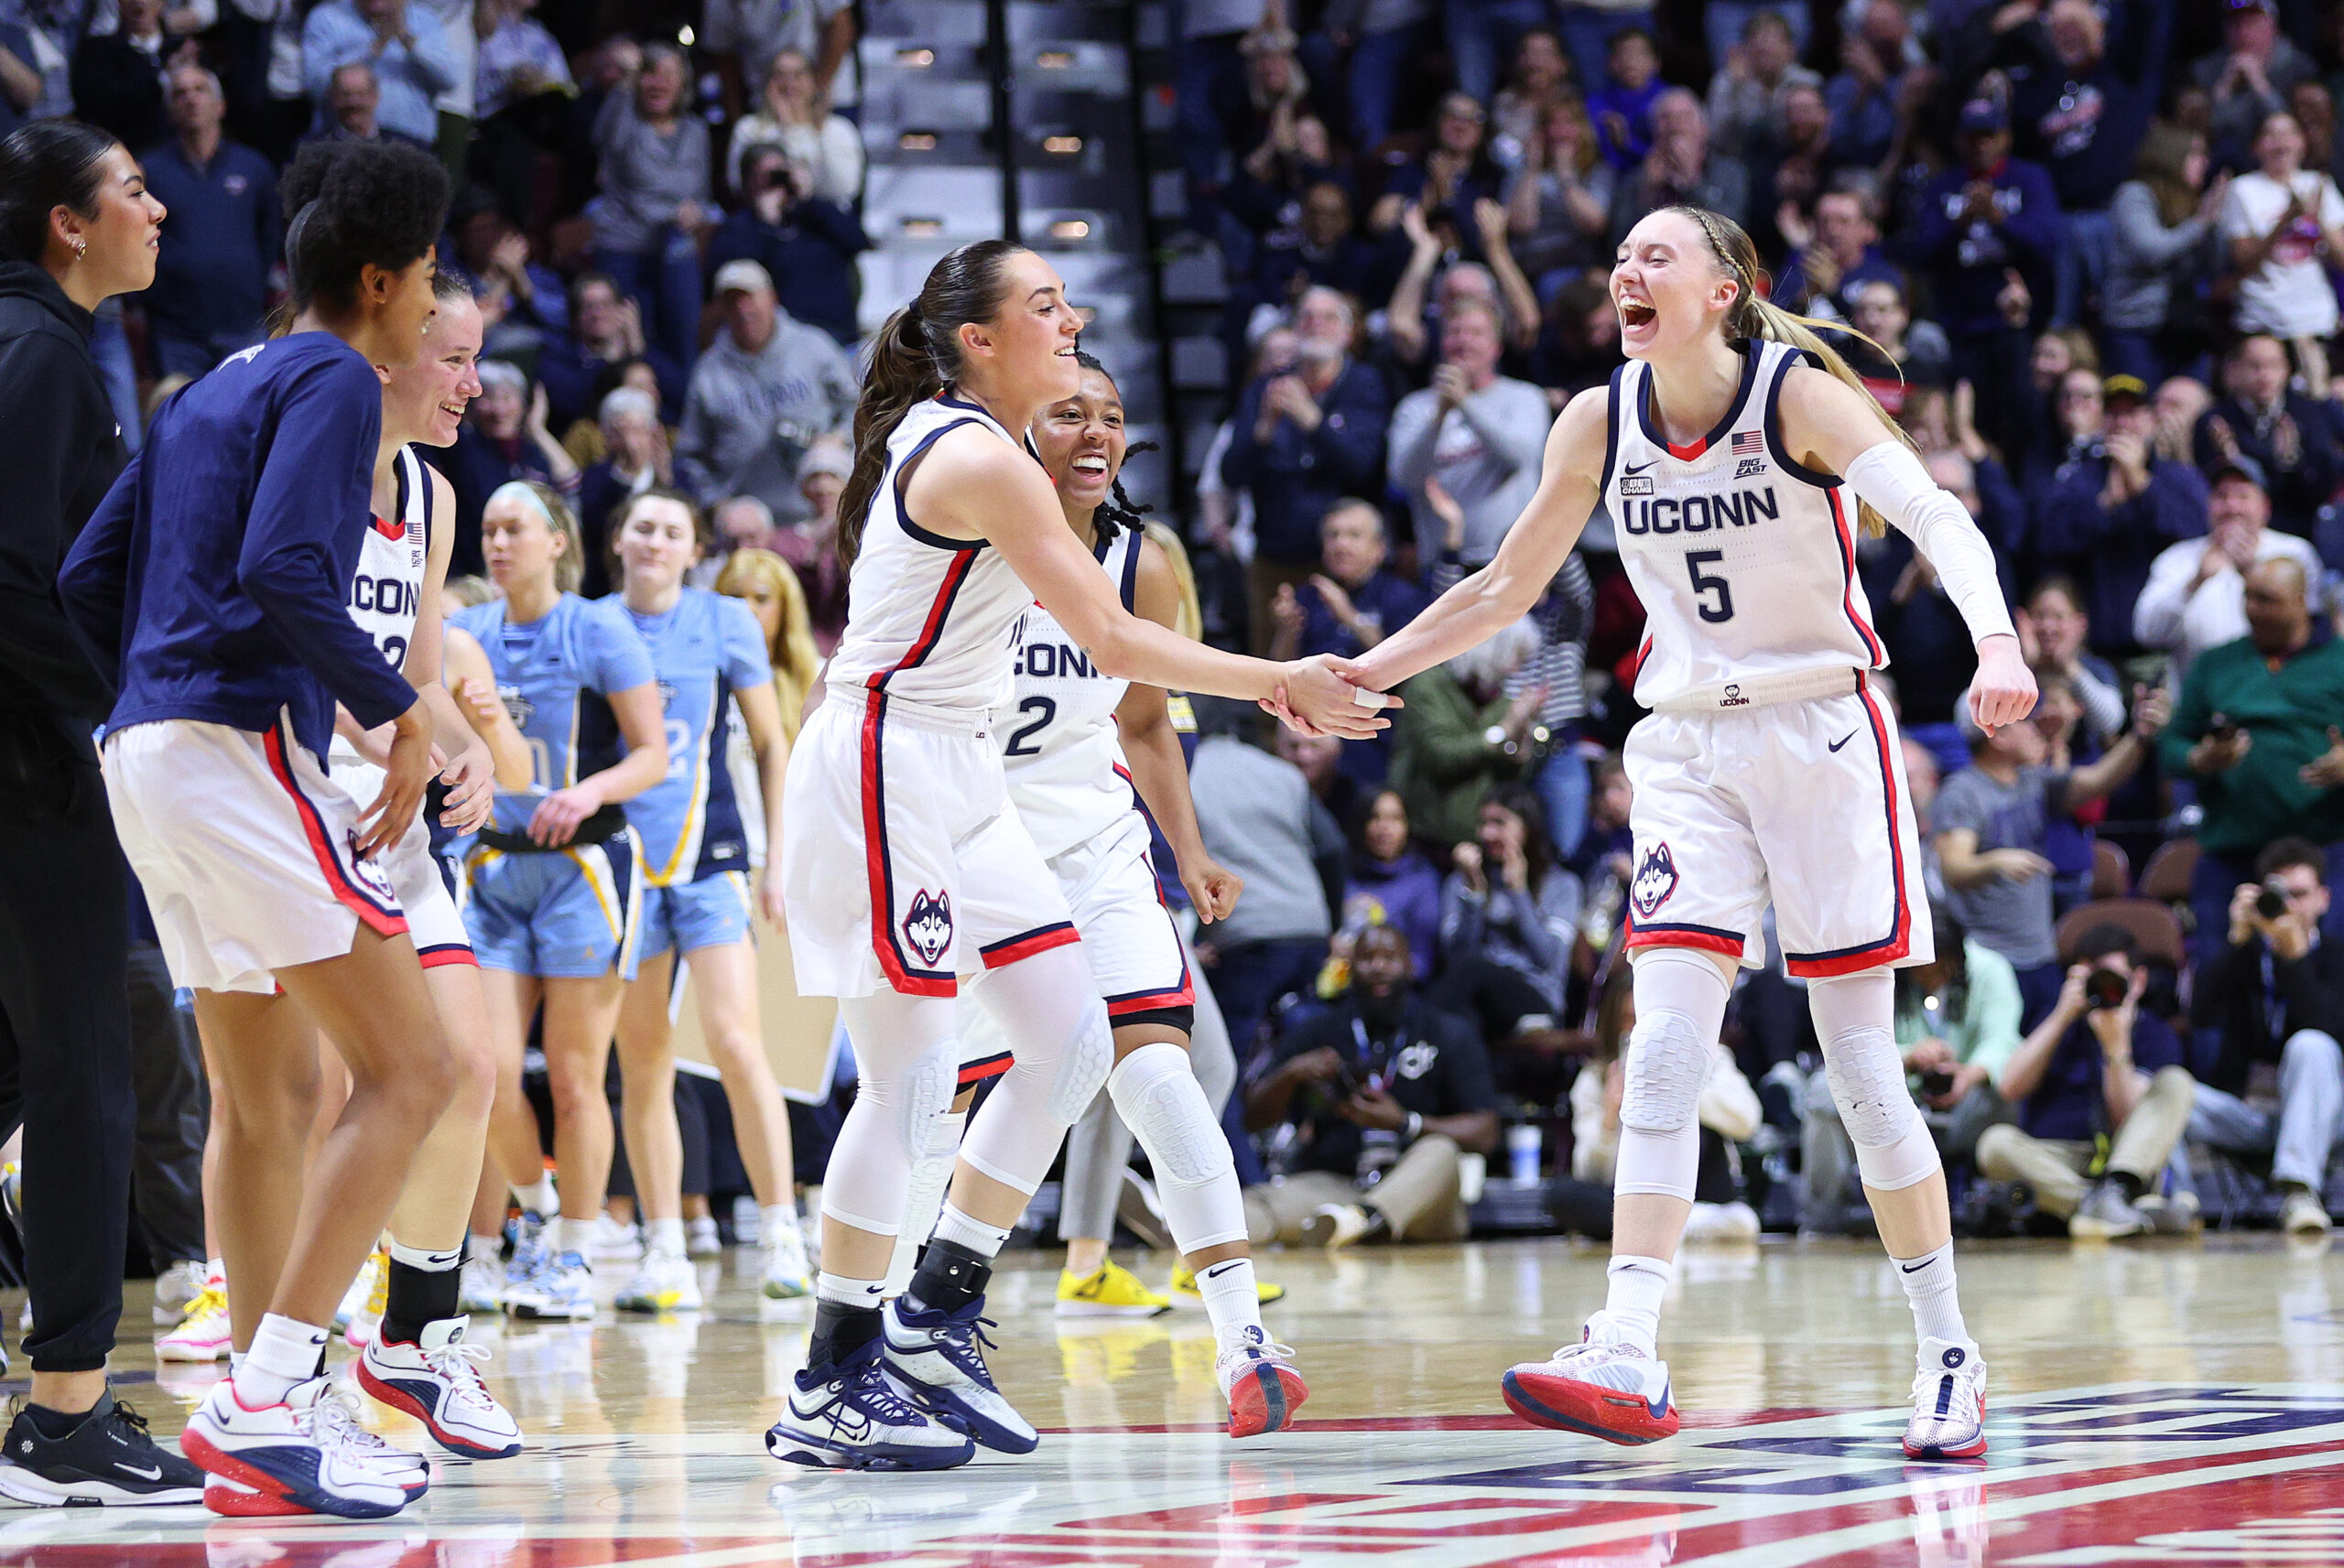 UConn Huskies secure fourth consecutive Big East Tournament Title